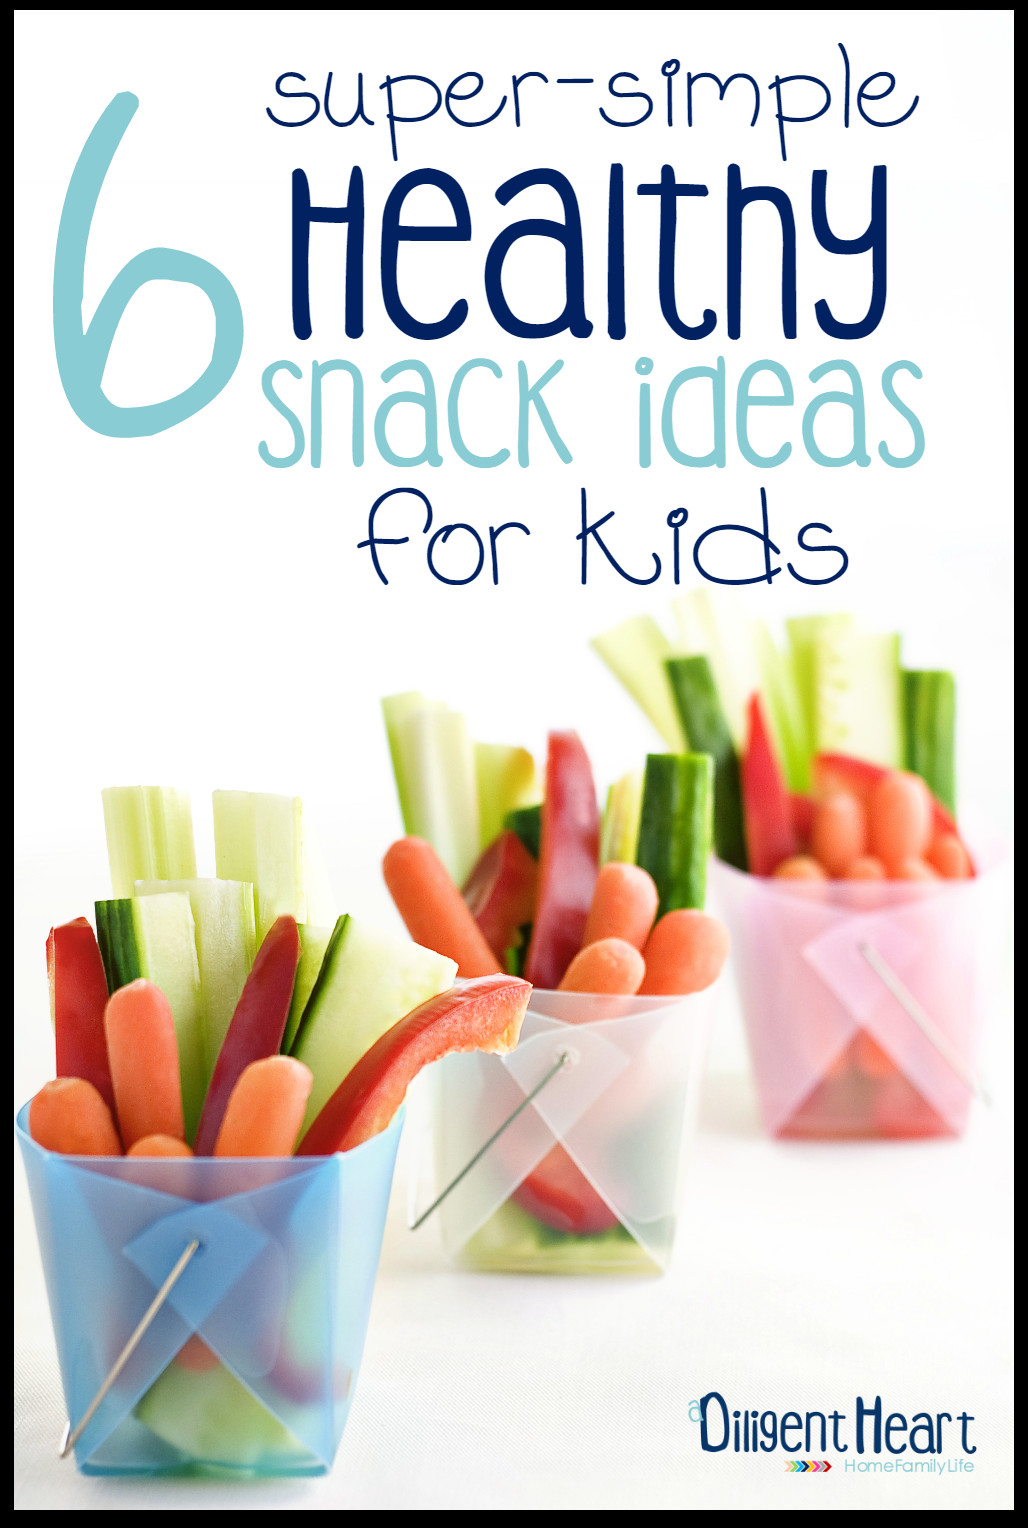 Simple Healthy Snacks
 6 Super Simple Healthy Snack Ideas For Kids